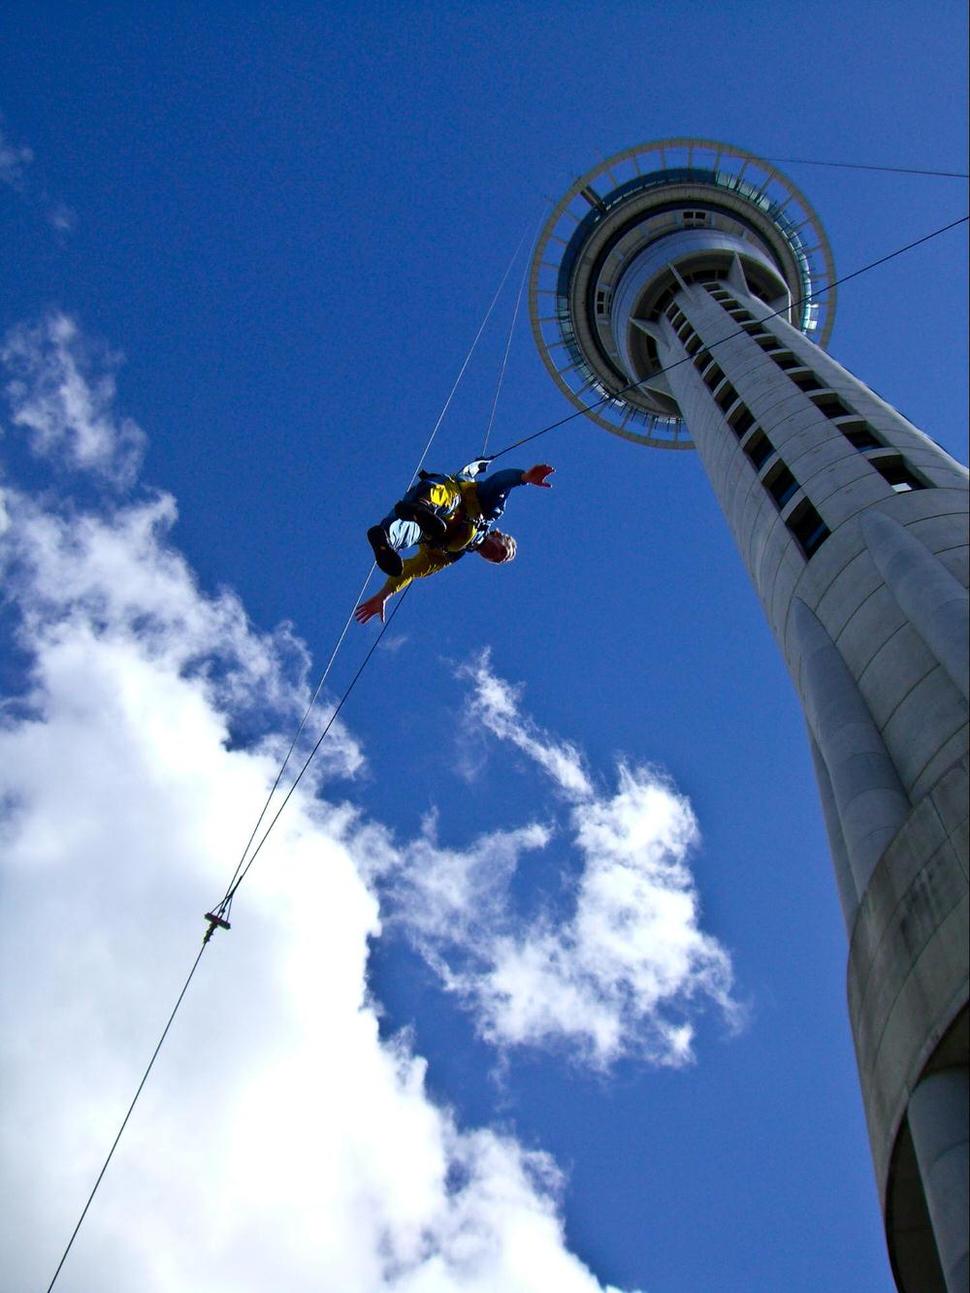 Sky Tower is over 1,000 feet tall and dominates the Auckland skyline. If you’re brave enough to leave the observation deck, you can go for a walk on the top of the tower and if you’re a maniac, you can even bungee jump off it.